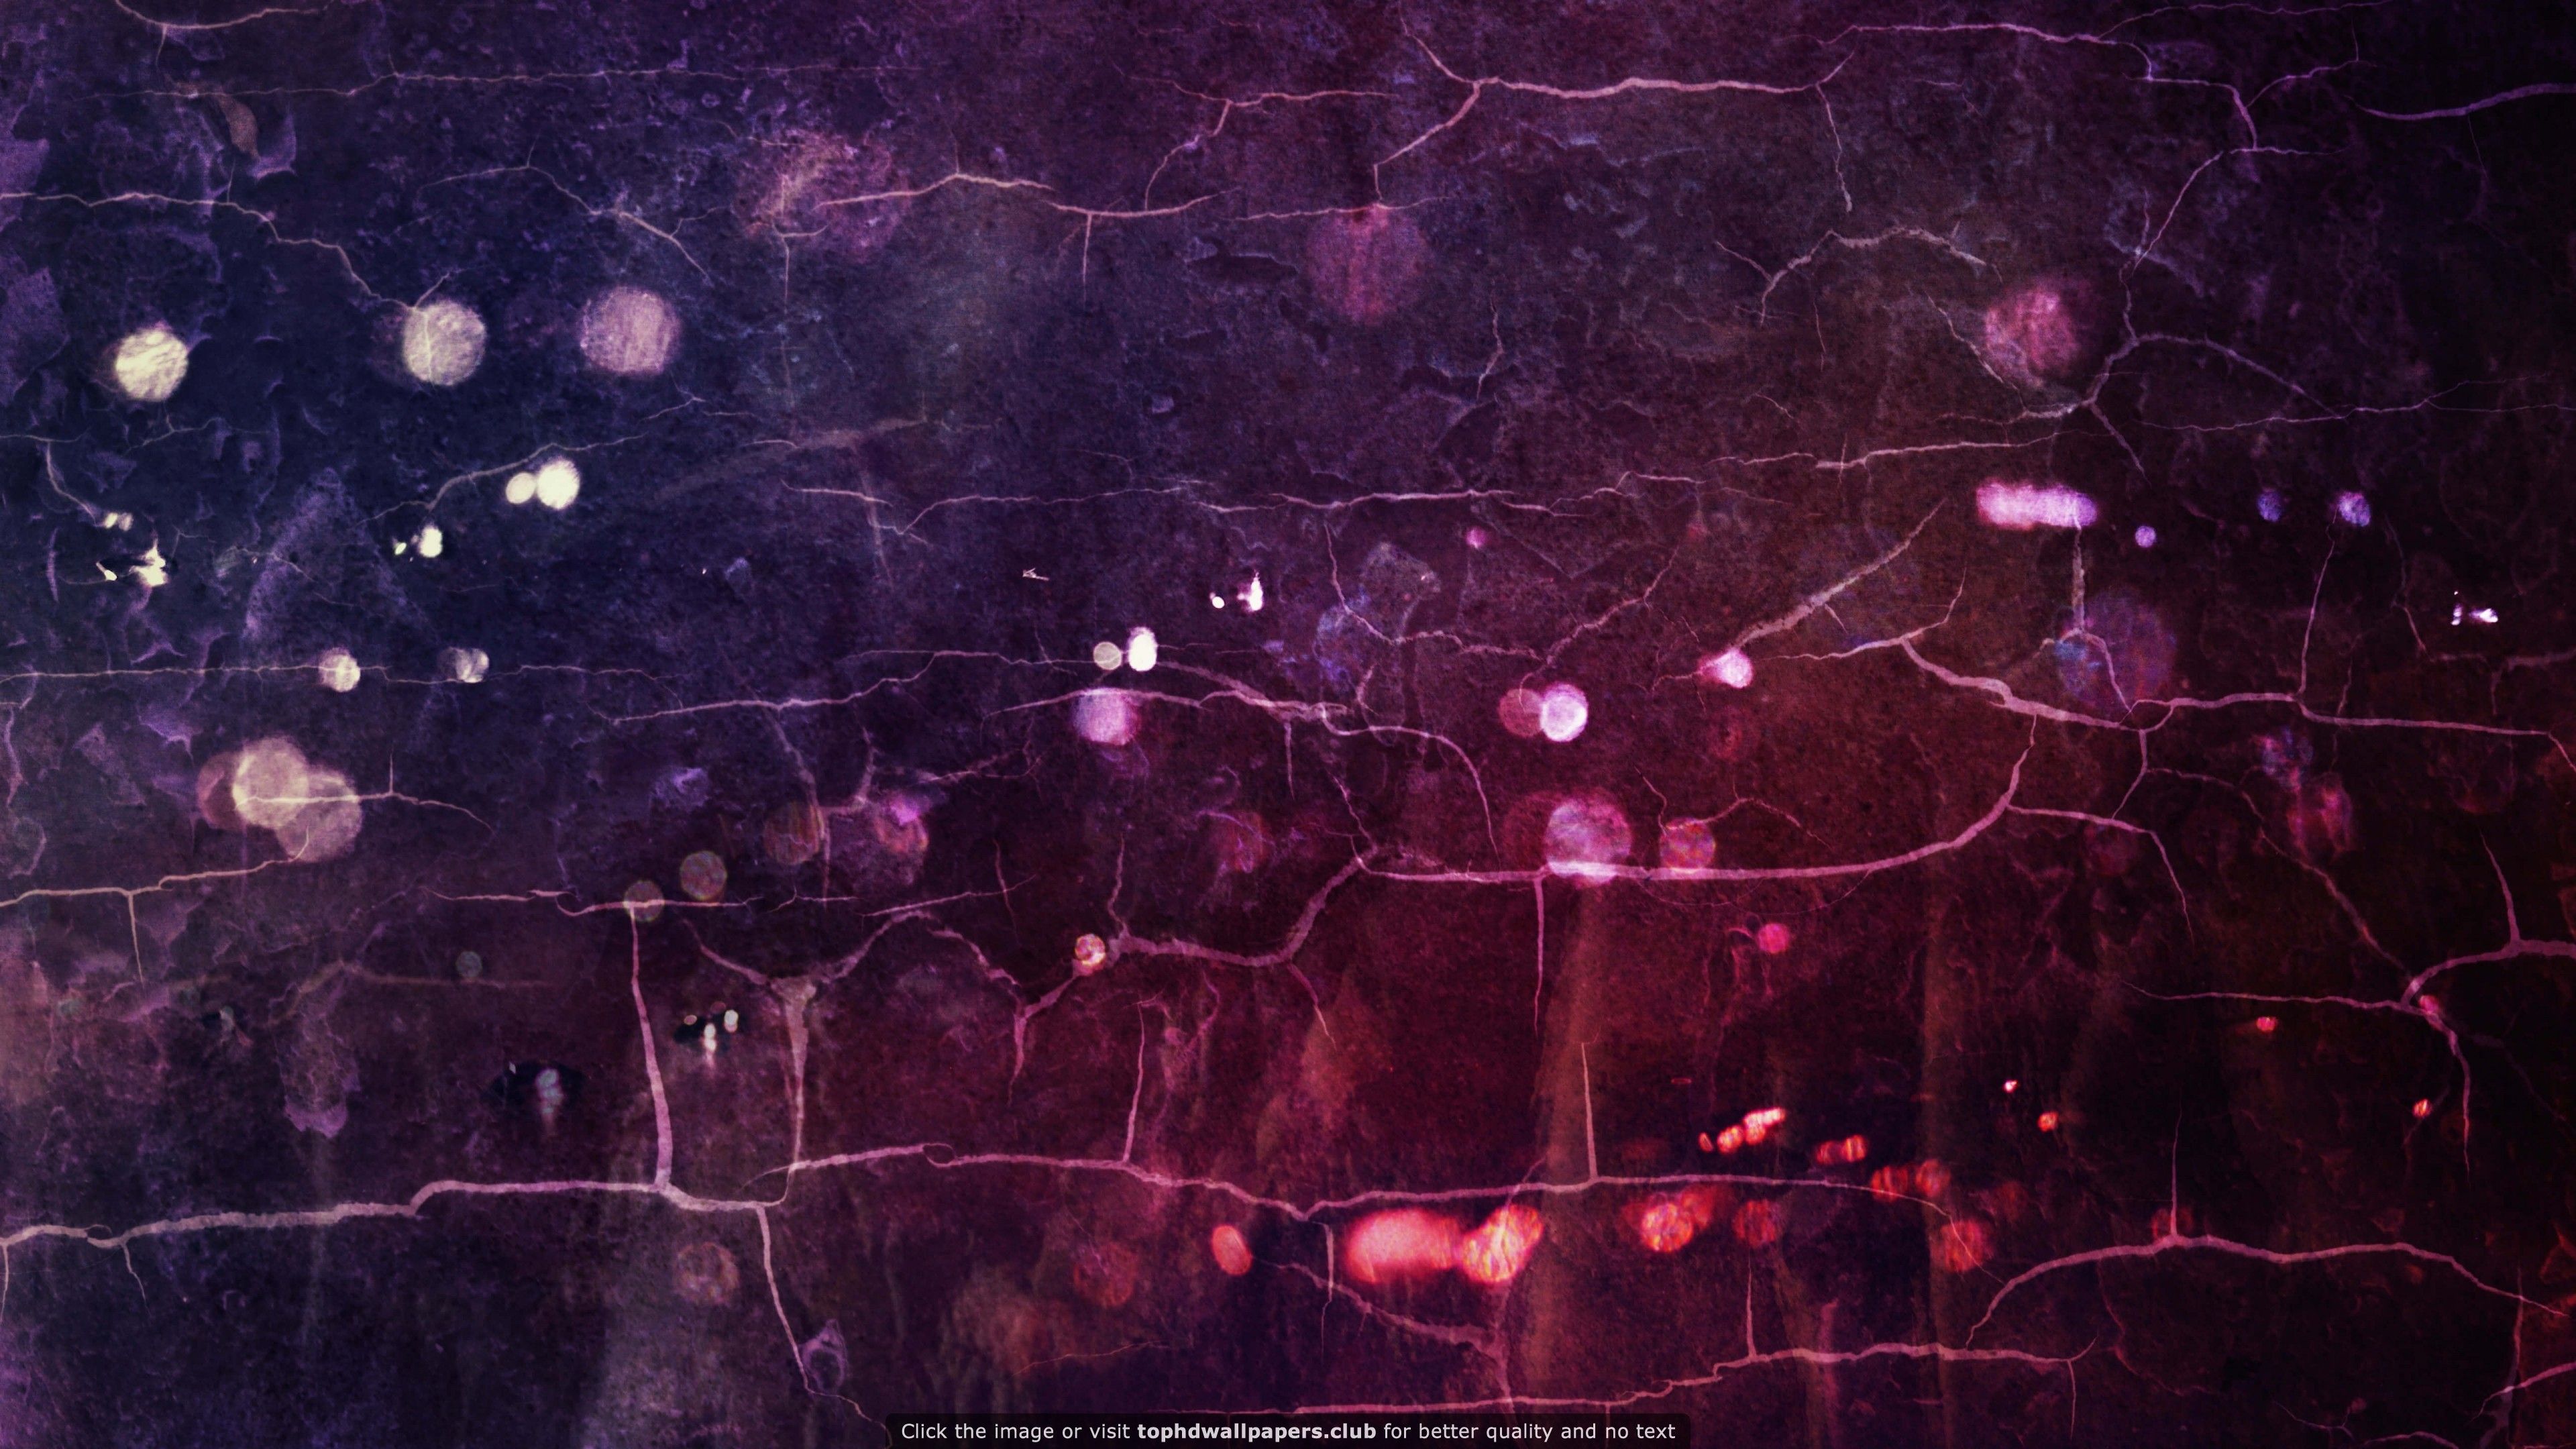 A purple and black background with white dots - Grunge